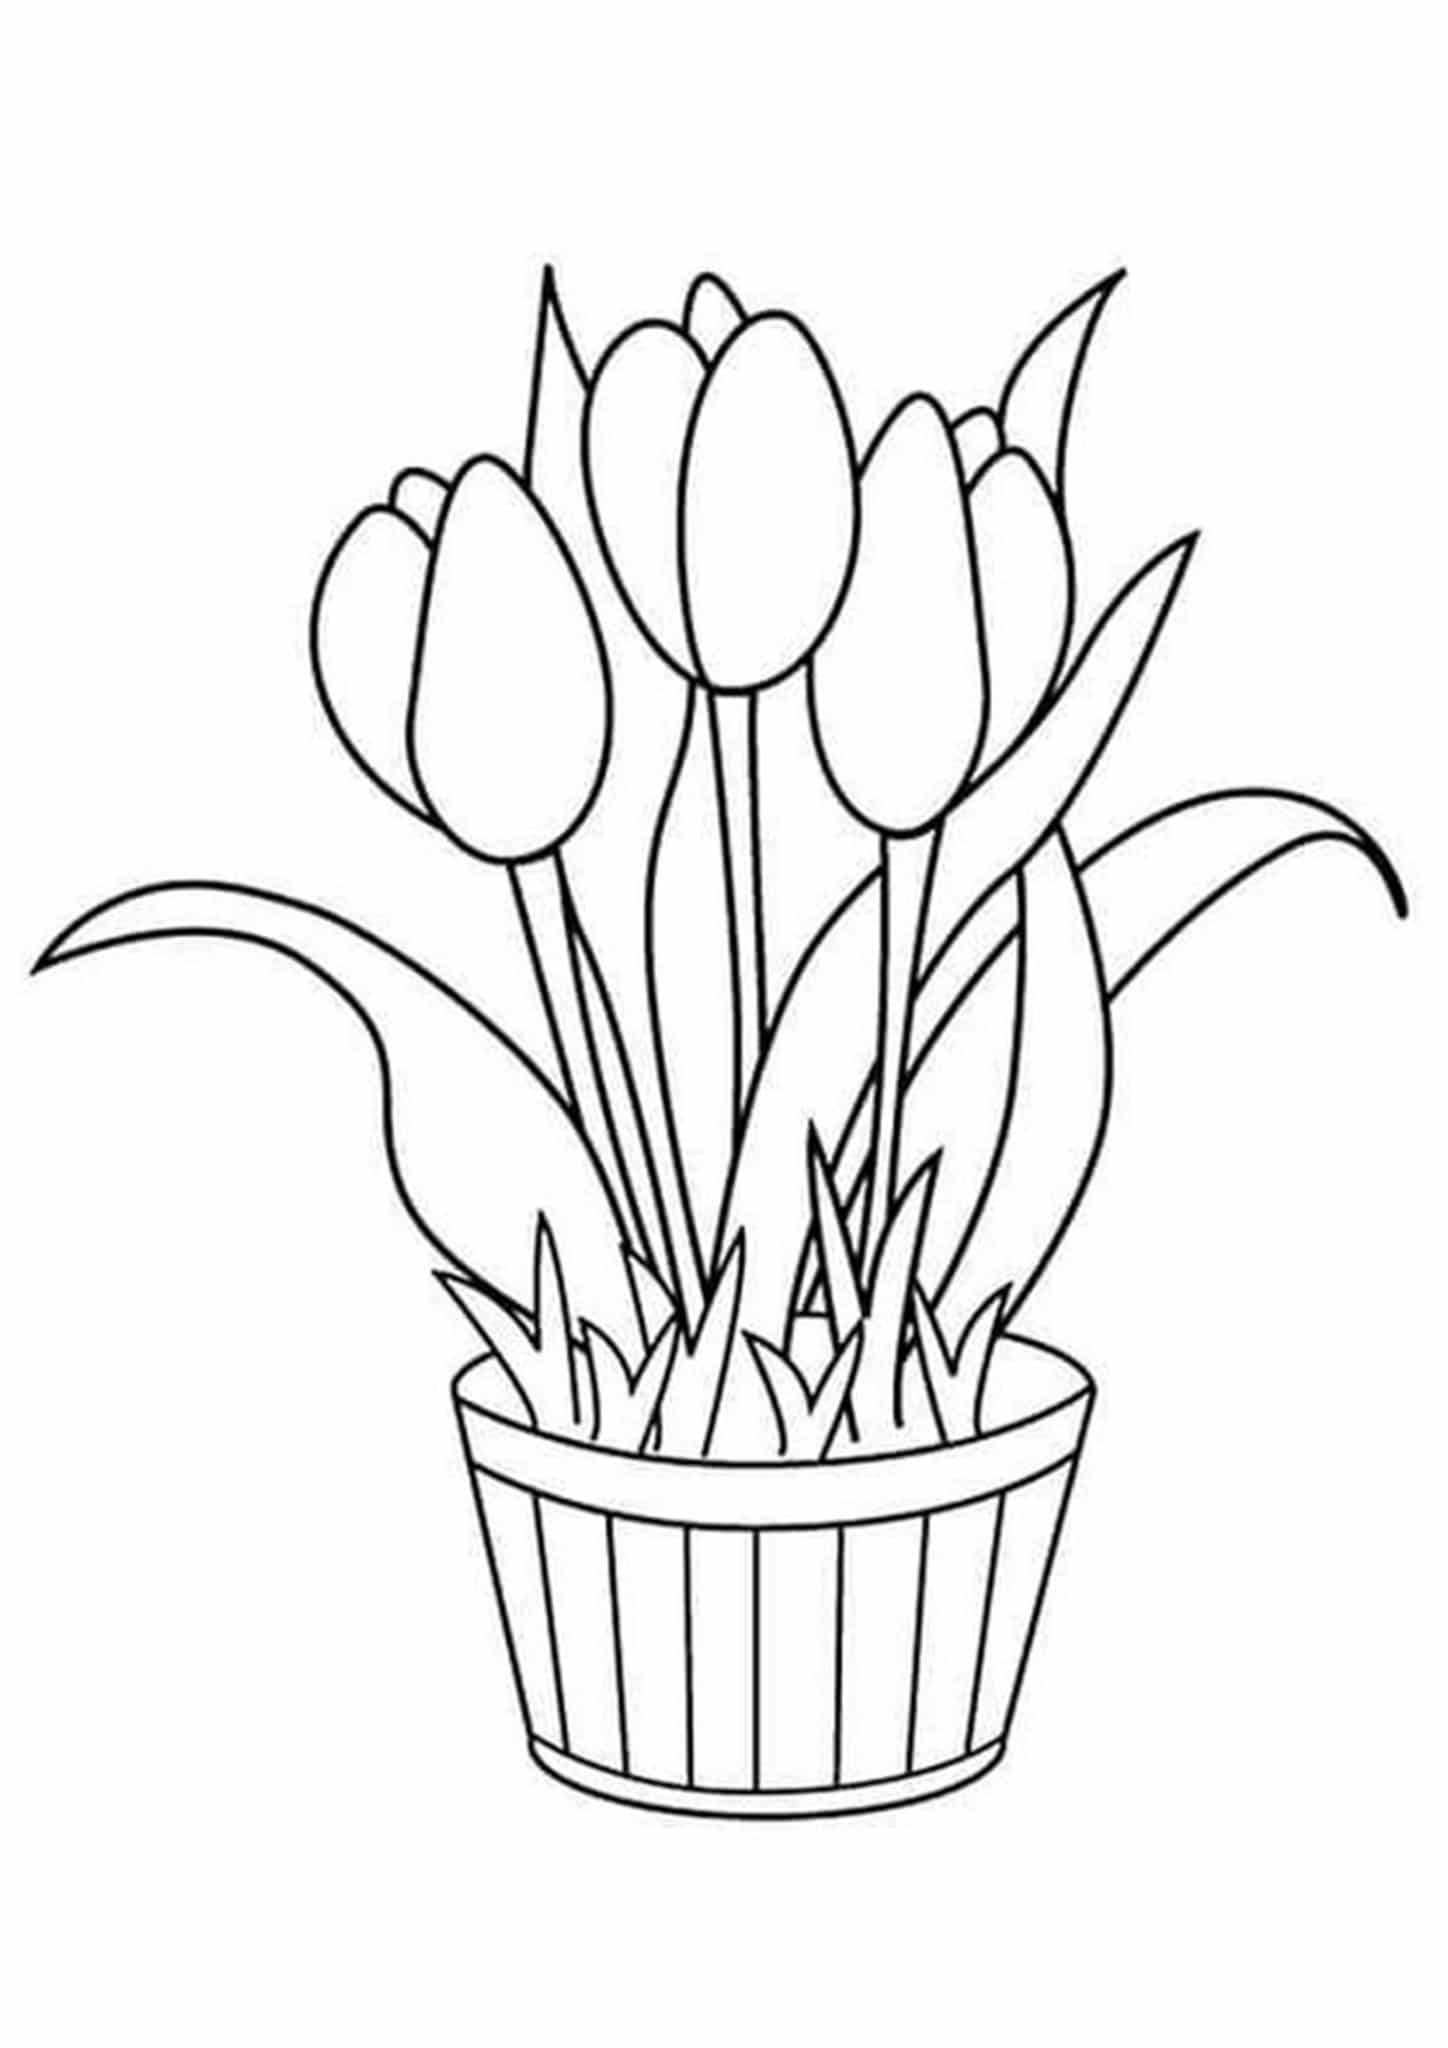 Free & Easy To Print Flower Coloring Pages - Tulamama